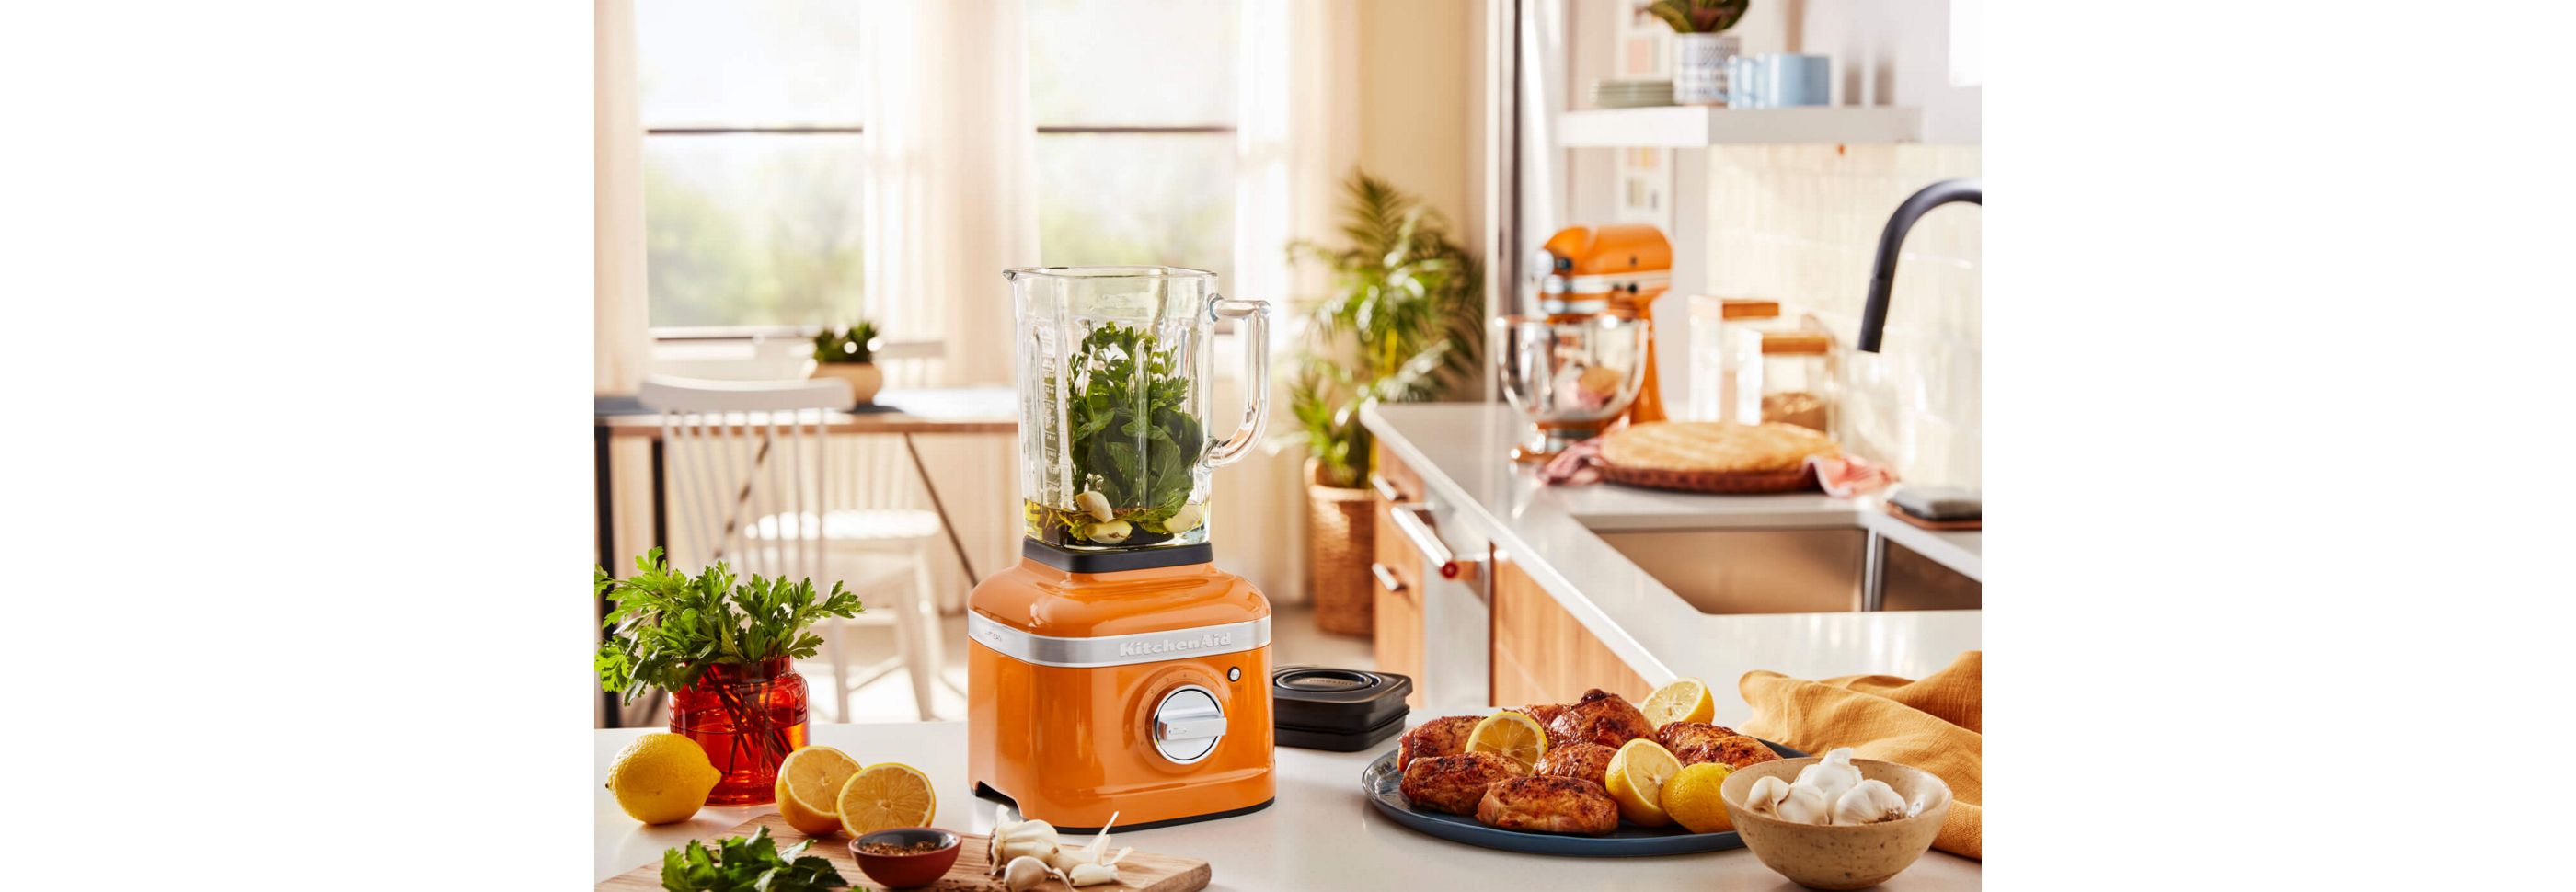 https://kitchenaid-h.assetsadobe.com/is/image/content/dam/business-unit/kitchenaid/en-us/digital-assets/pages/color-of-the-year/overlay-carousel-warmth.jpg?fit=constrain&fmt=jpg&hei=970&resMode=sharp2&utc=2021-02-19T20:31:34Z&wid=2800